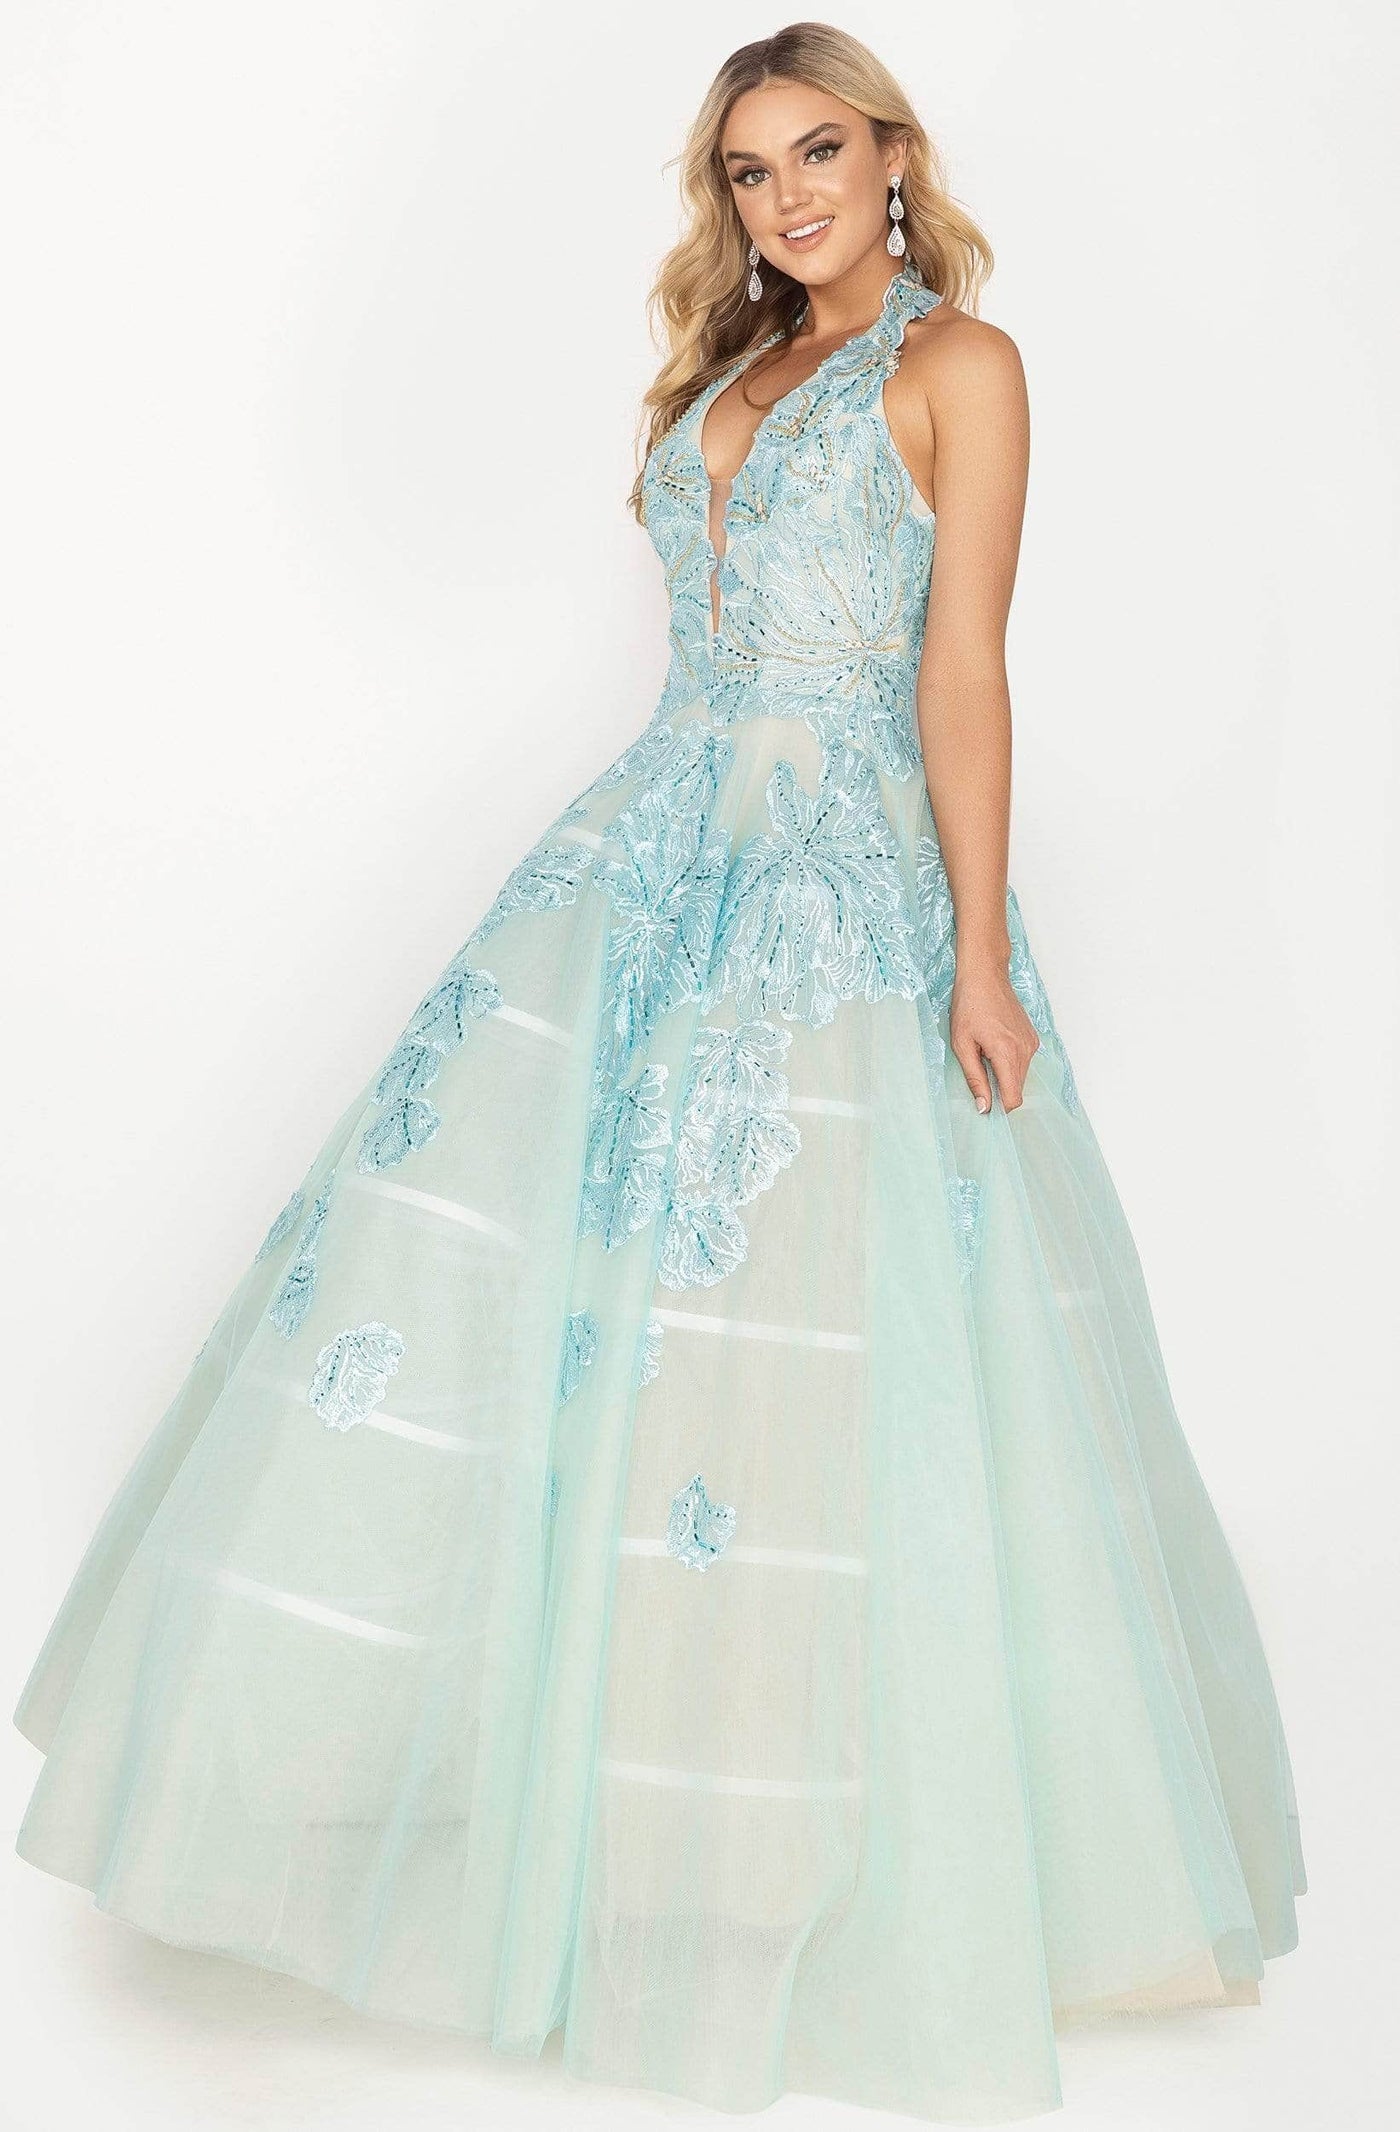 Terani Couture 2011P1174 - Halter Embroidered Ballgown Prom Dresses 14 /Dusty Blue